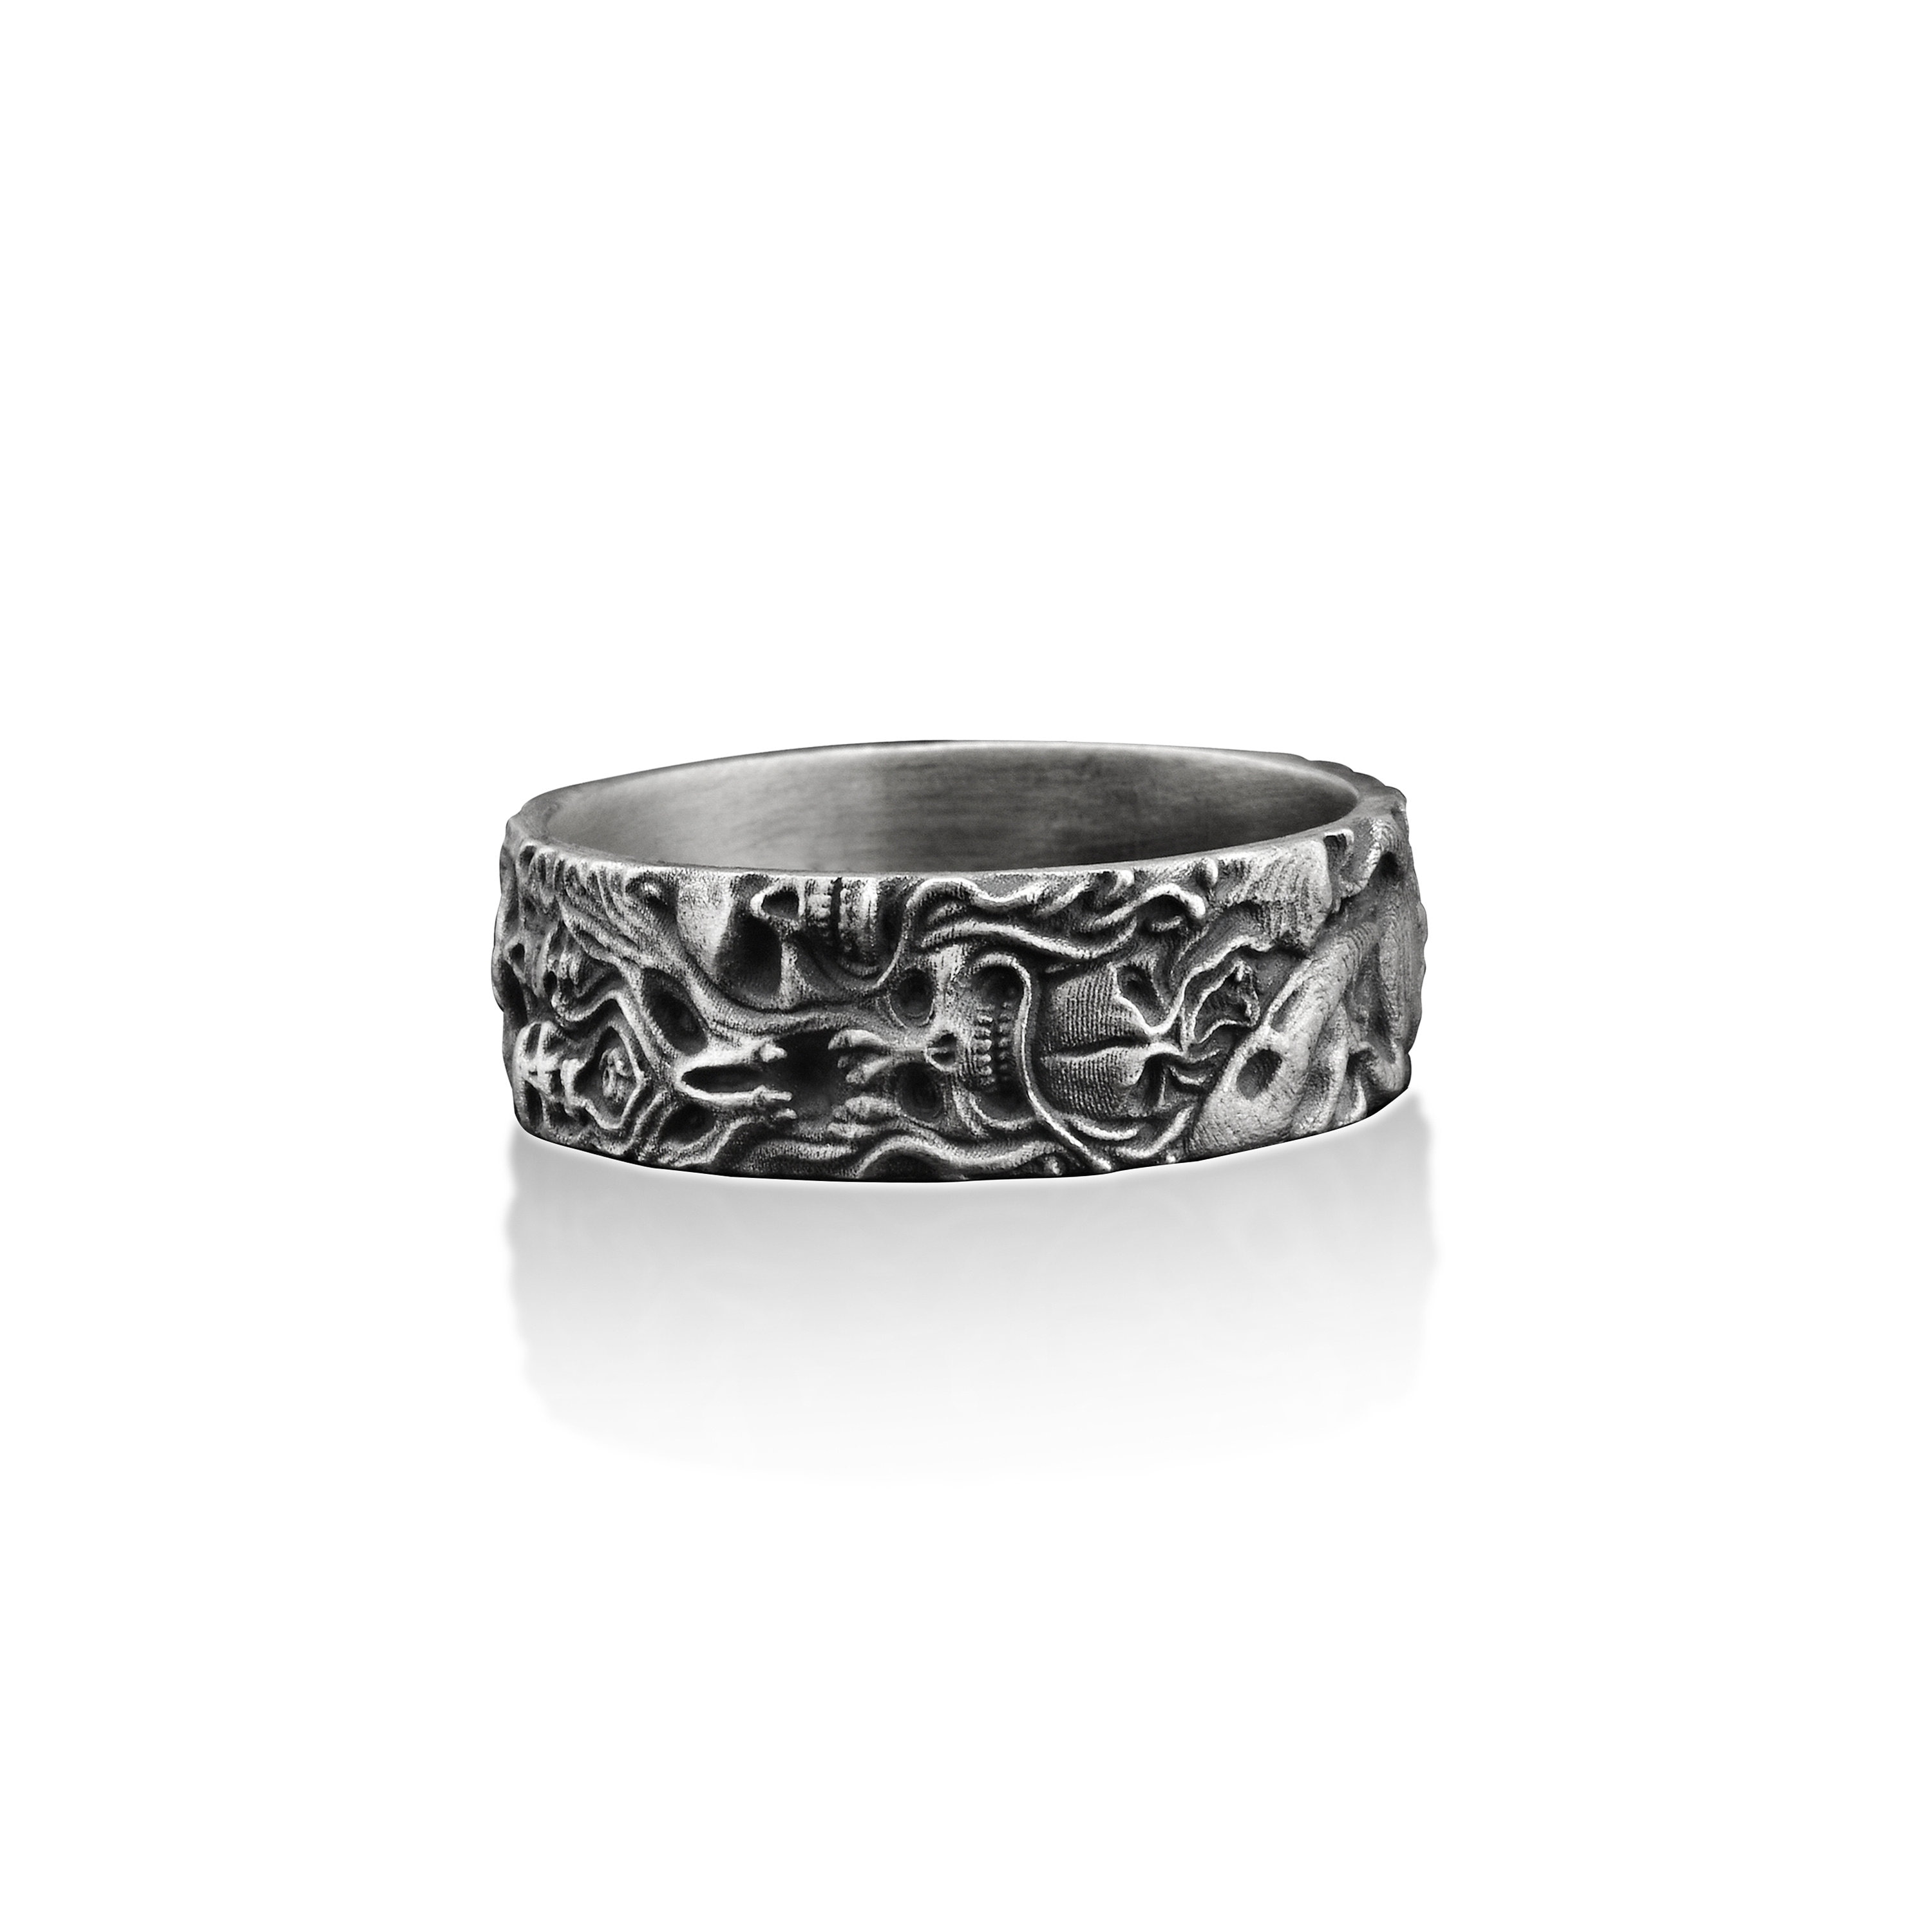 Buy Demons Handmade Sterling Silver Men Band Ring, Lucifer Stackable Biker  Ring, Silver Gothic Jewelry, Skull Gothic Ring, Anniversary Gift Online in  India - Etsy